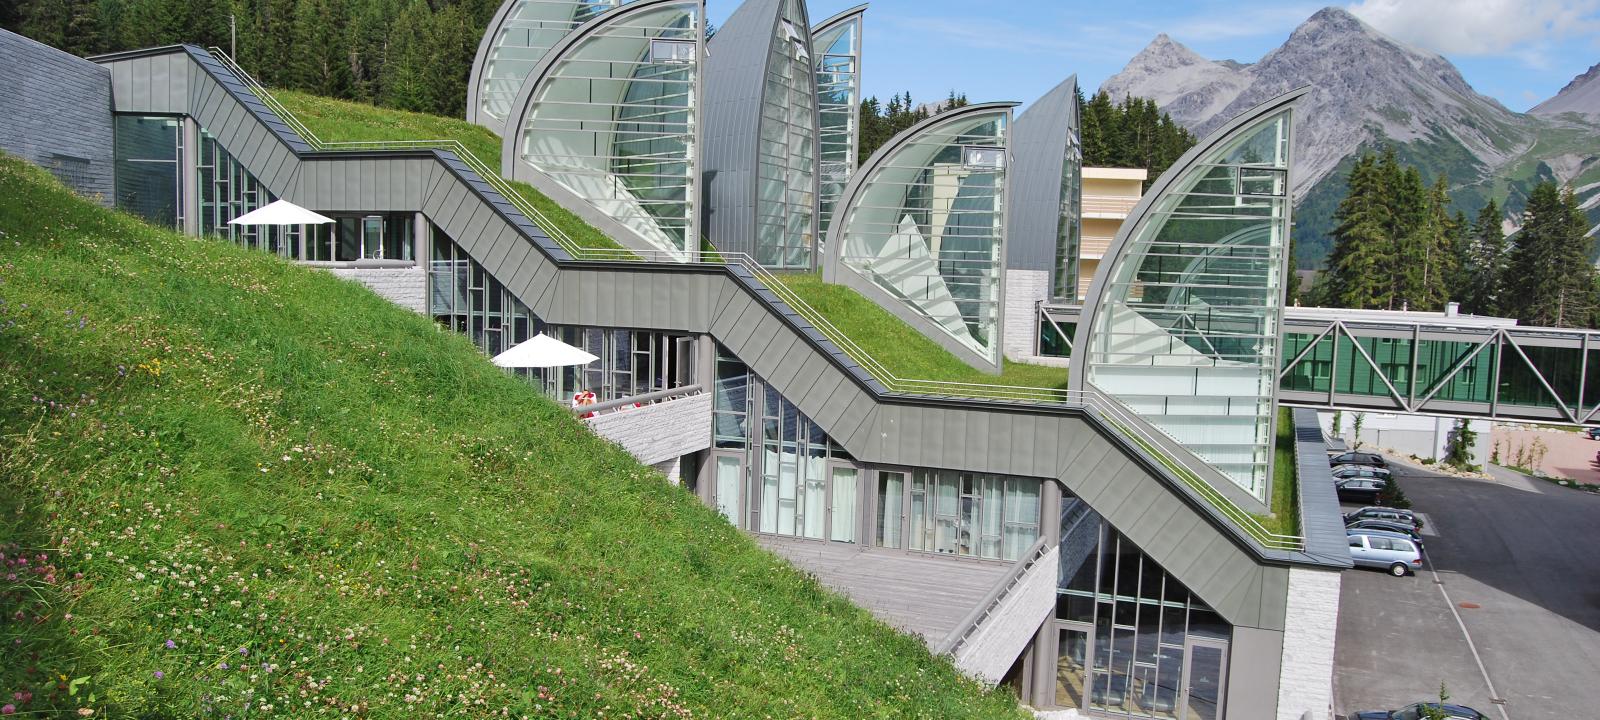 Pitched green roof with lawn and sail-shaped skylights